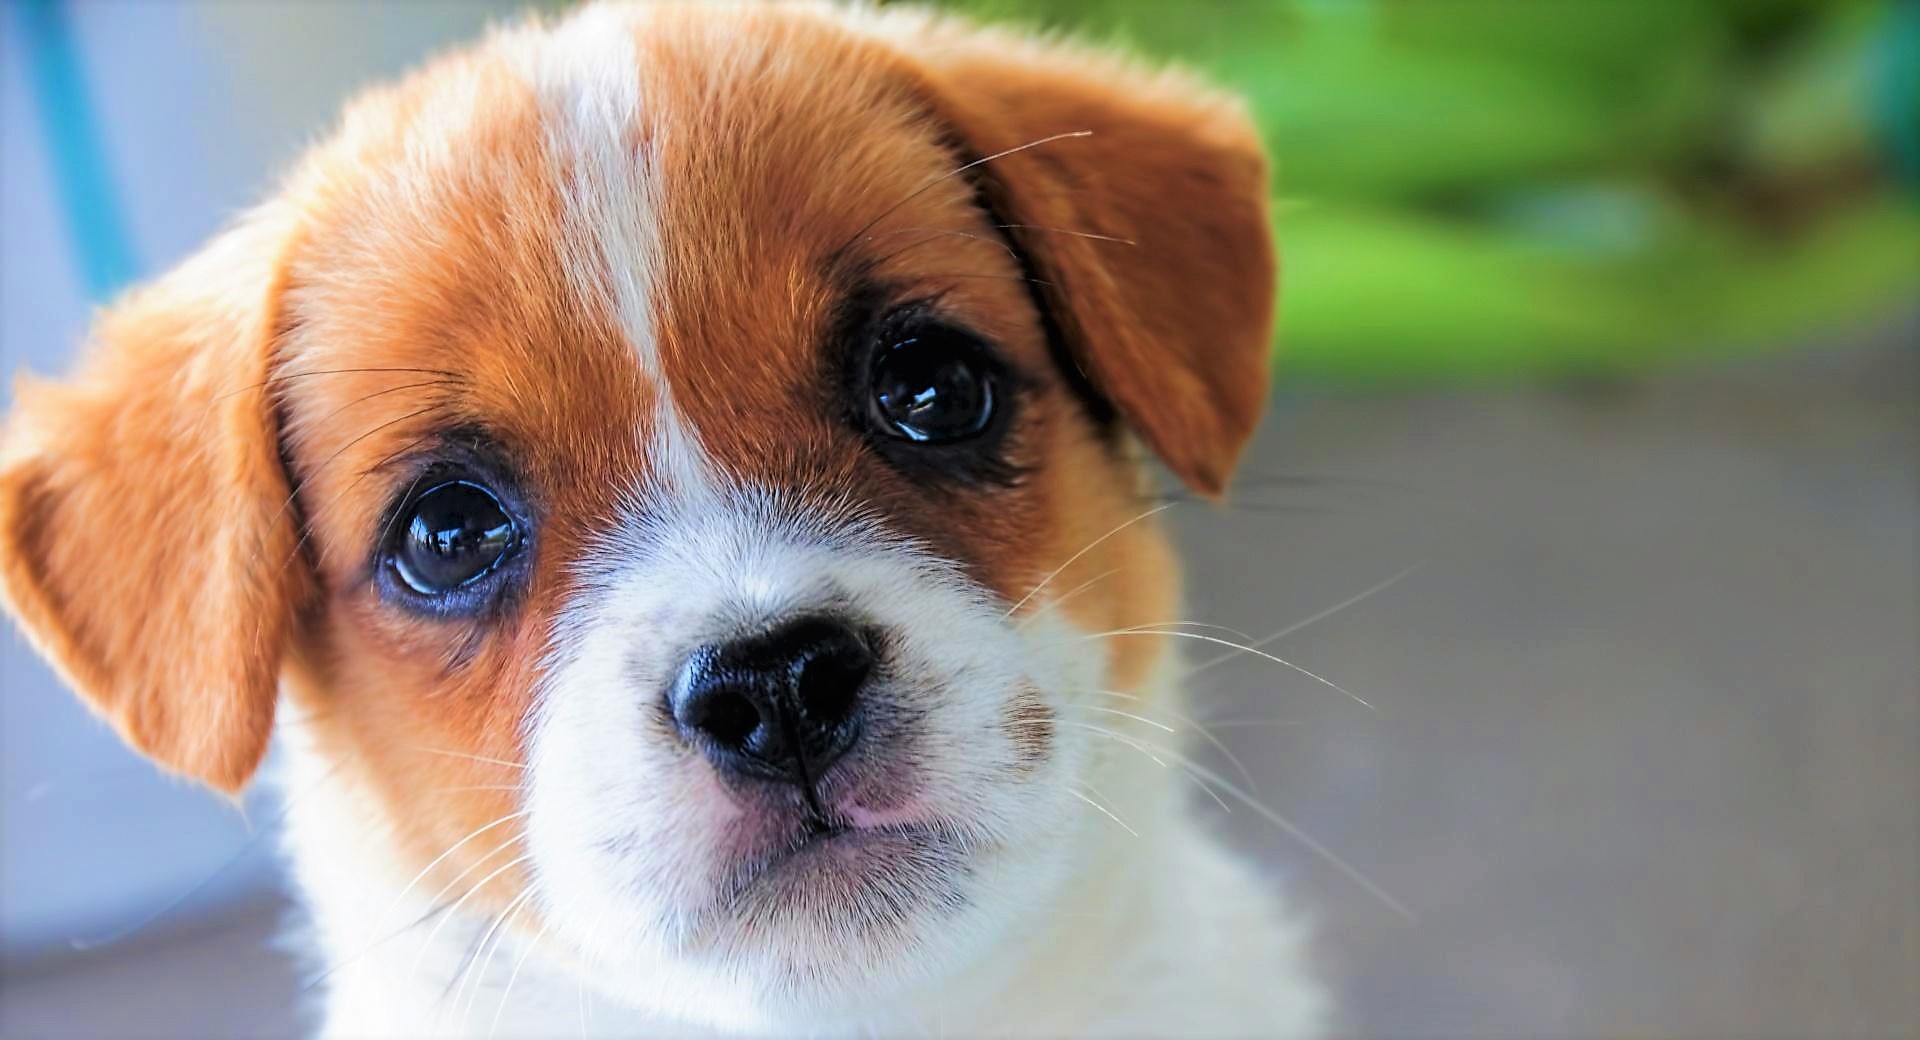  Cute  Puppy  Face  Wallpaper and Background Image 1920x1040 